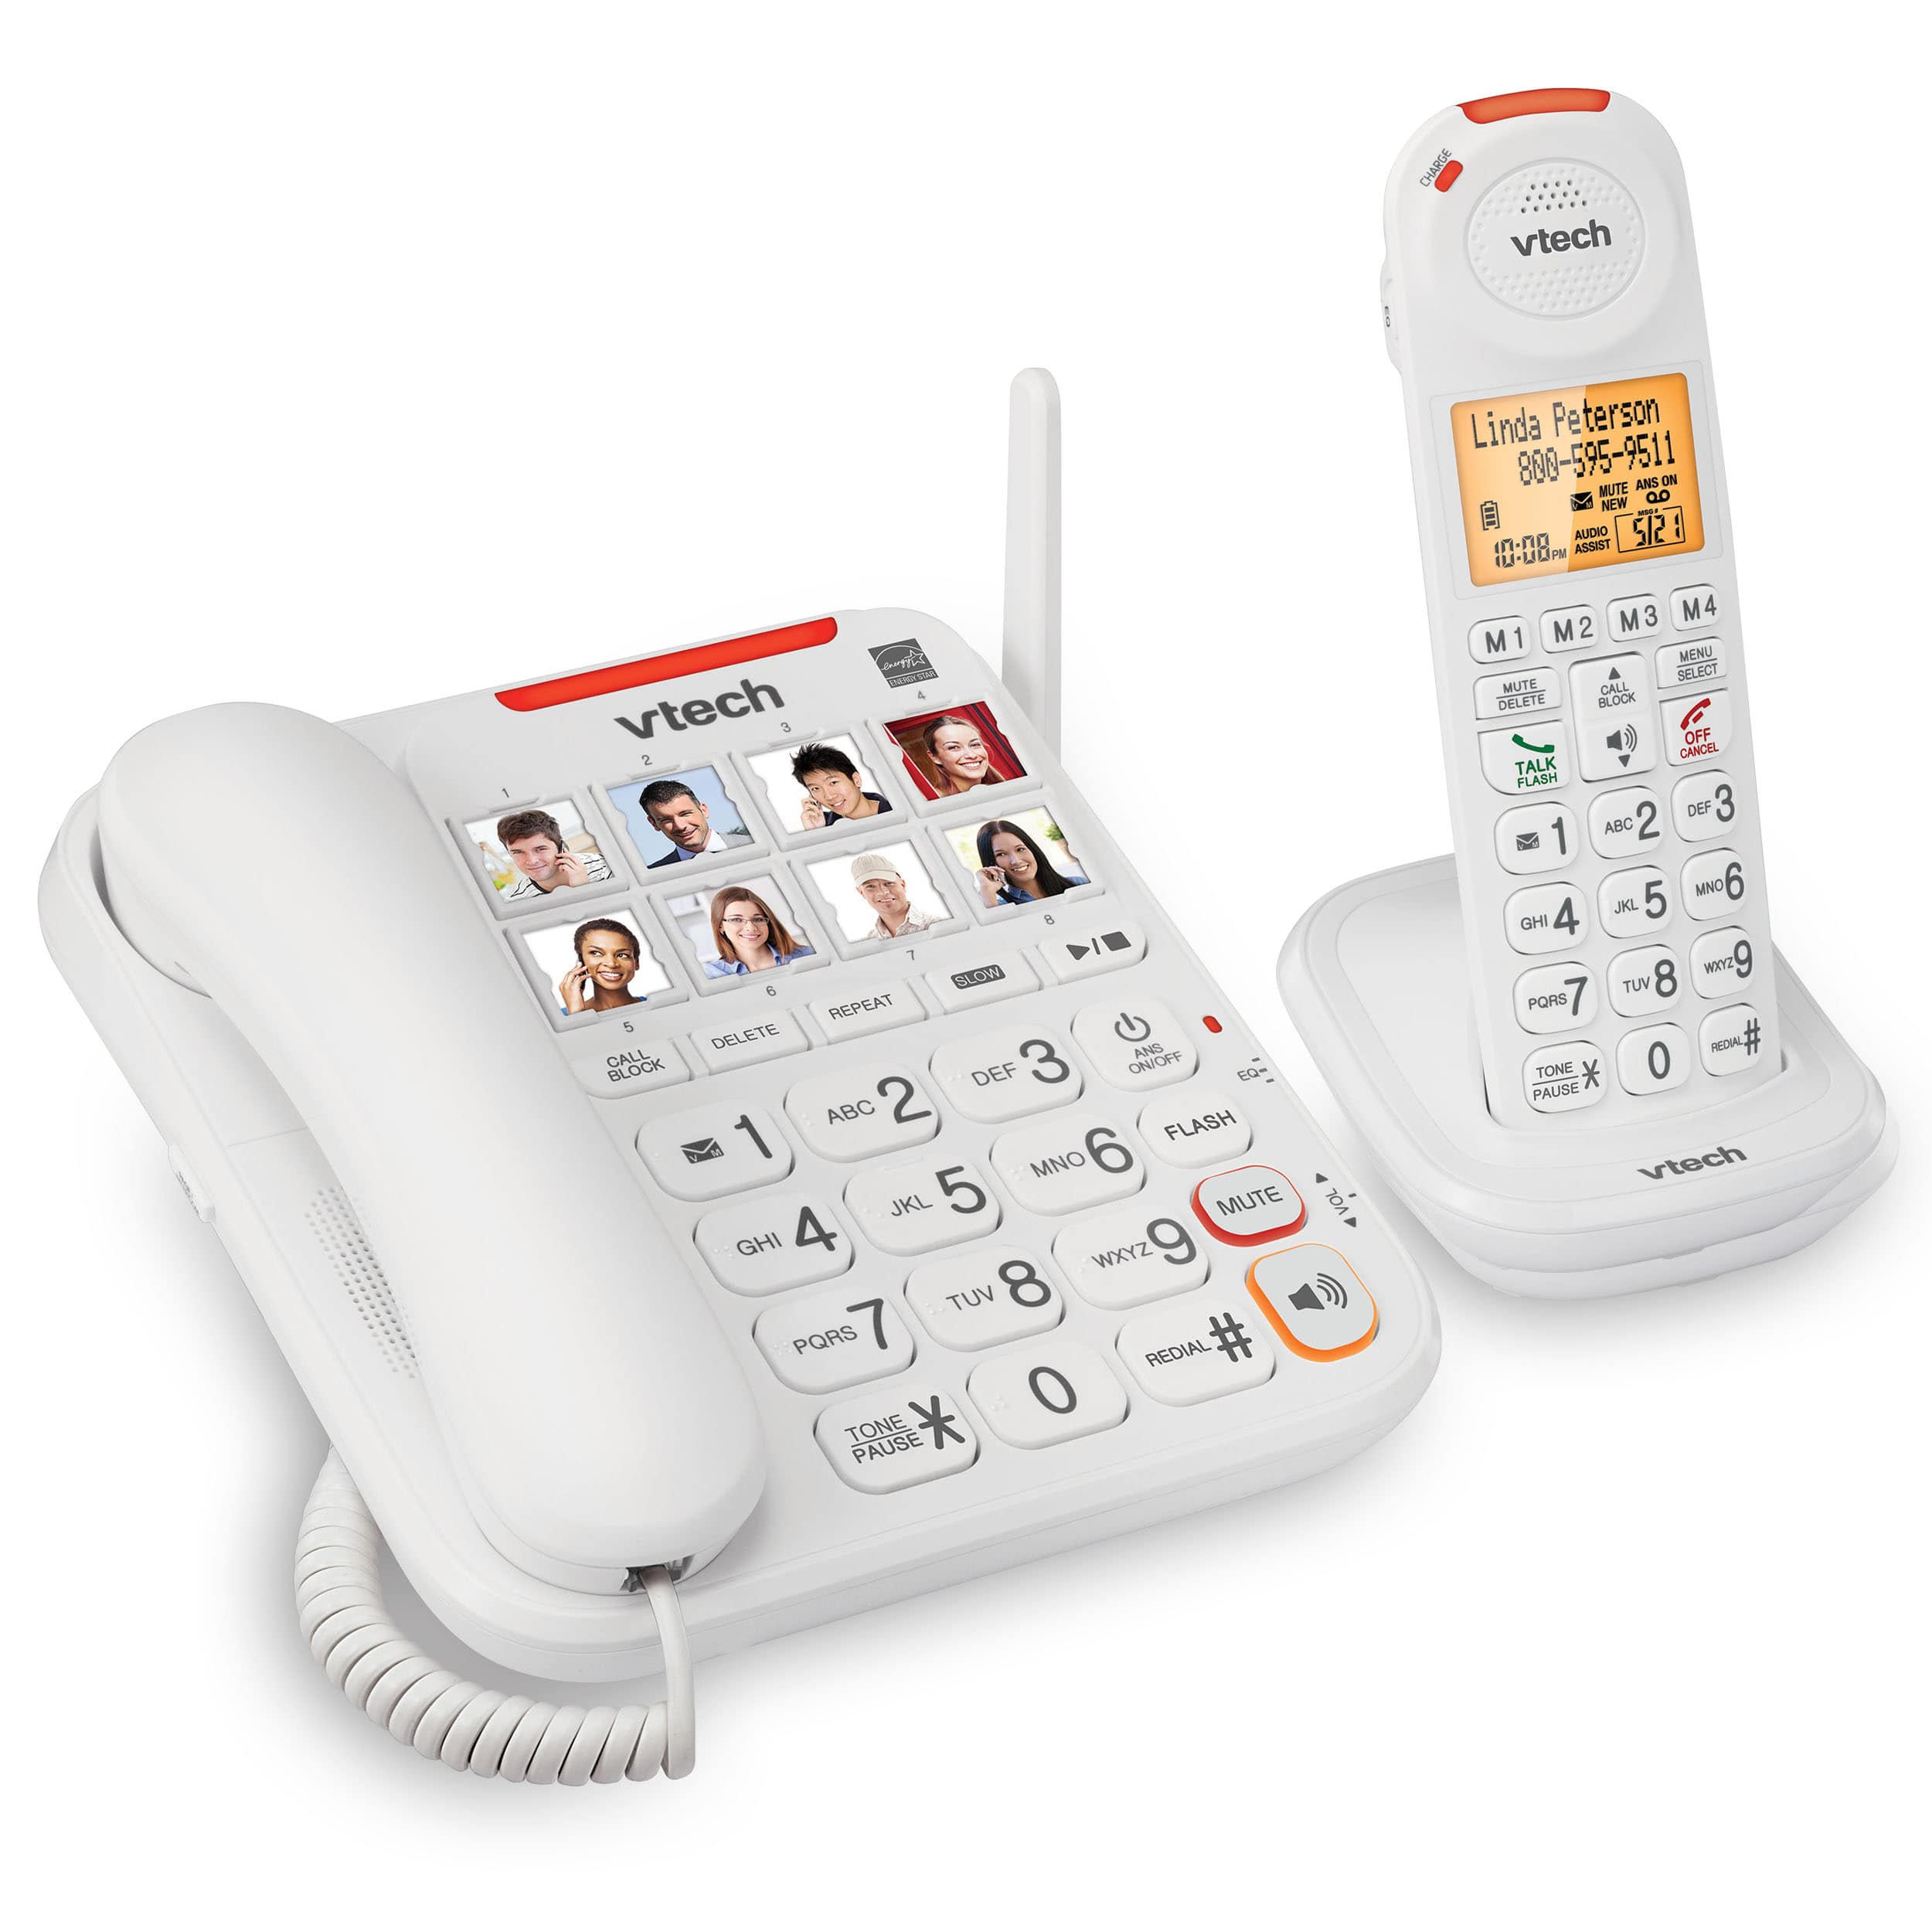 3 Handset Amplified Corded/Cordless Answering System with Smart Call Blocker - view 3